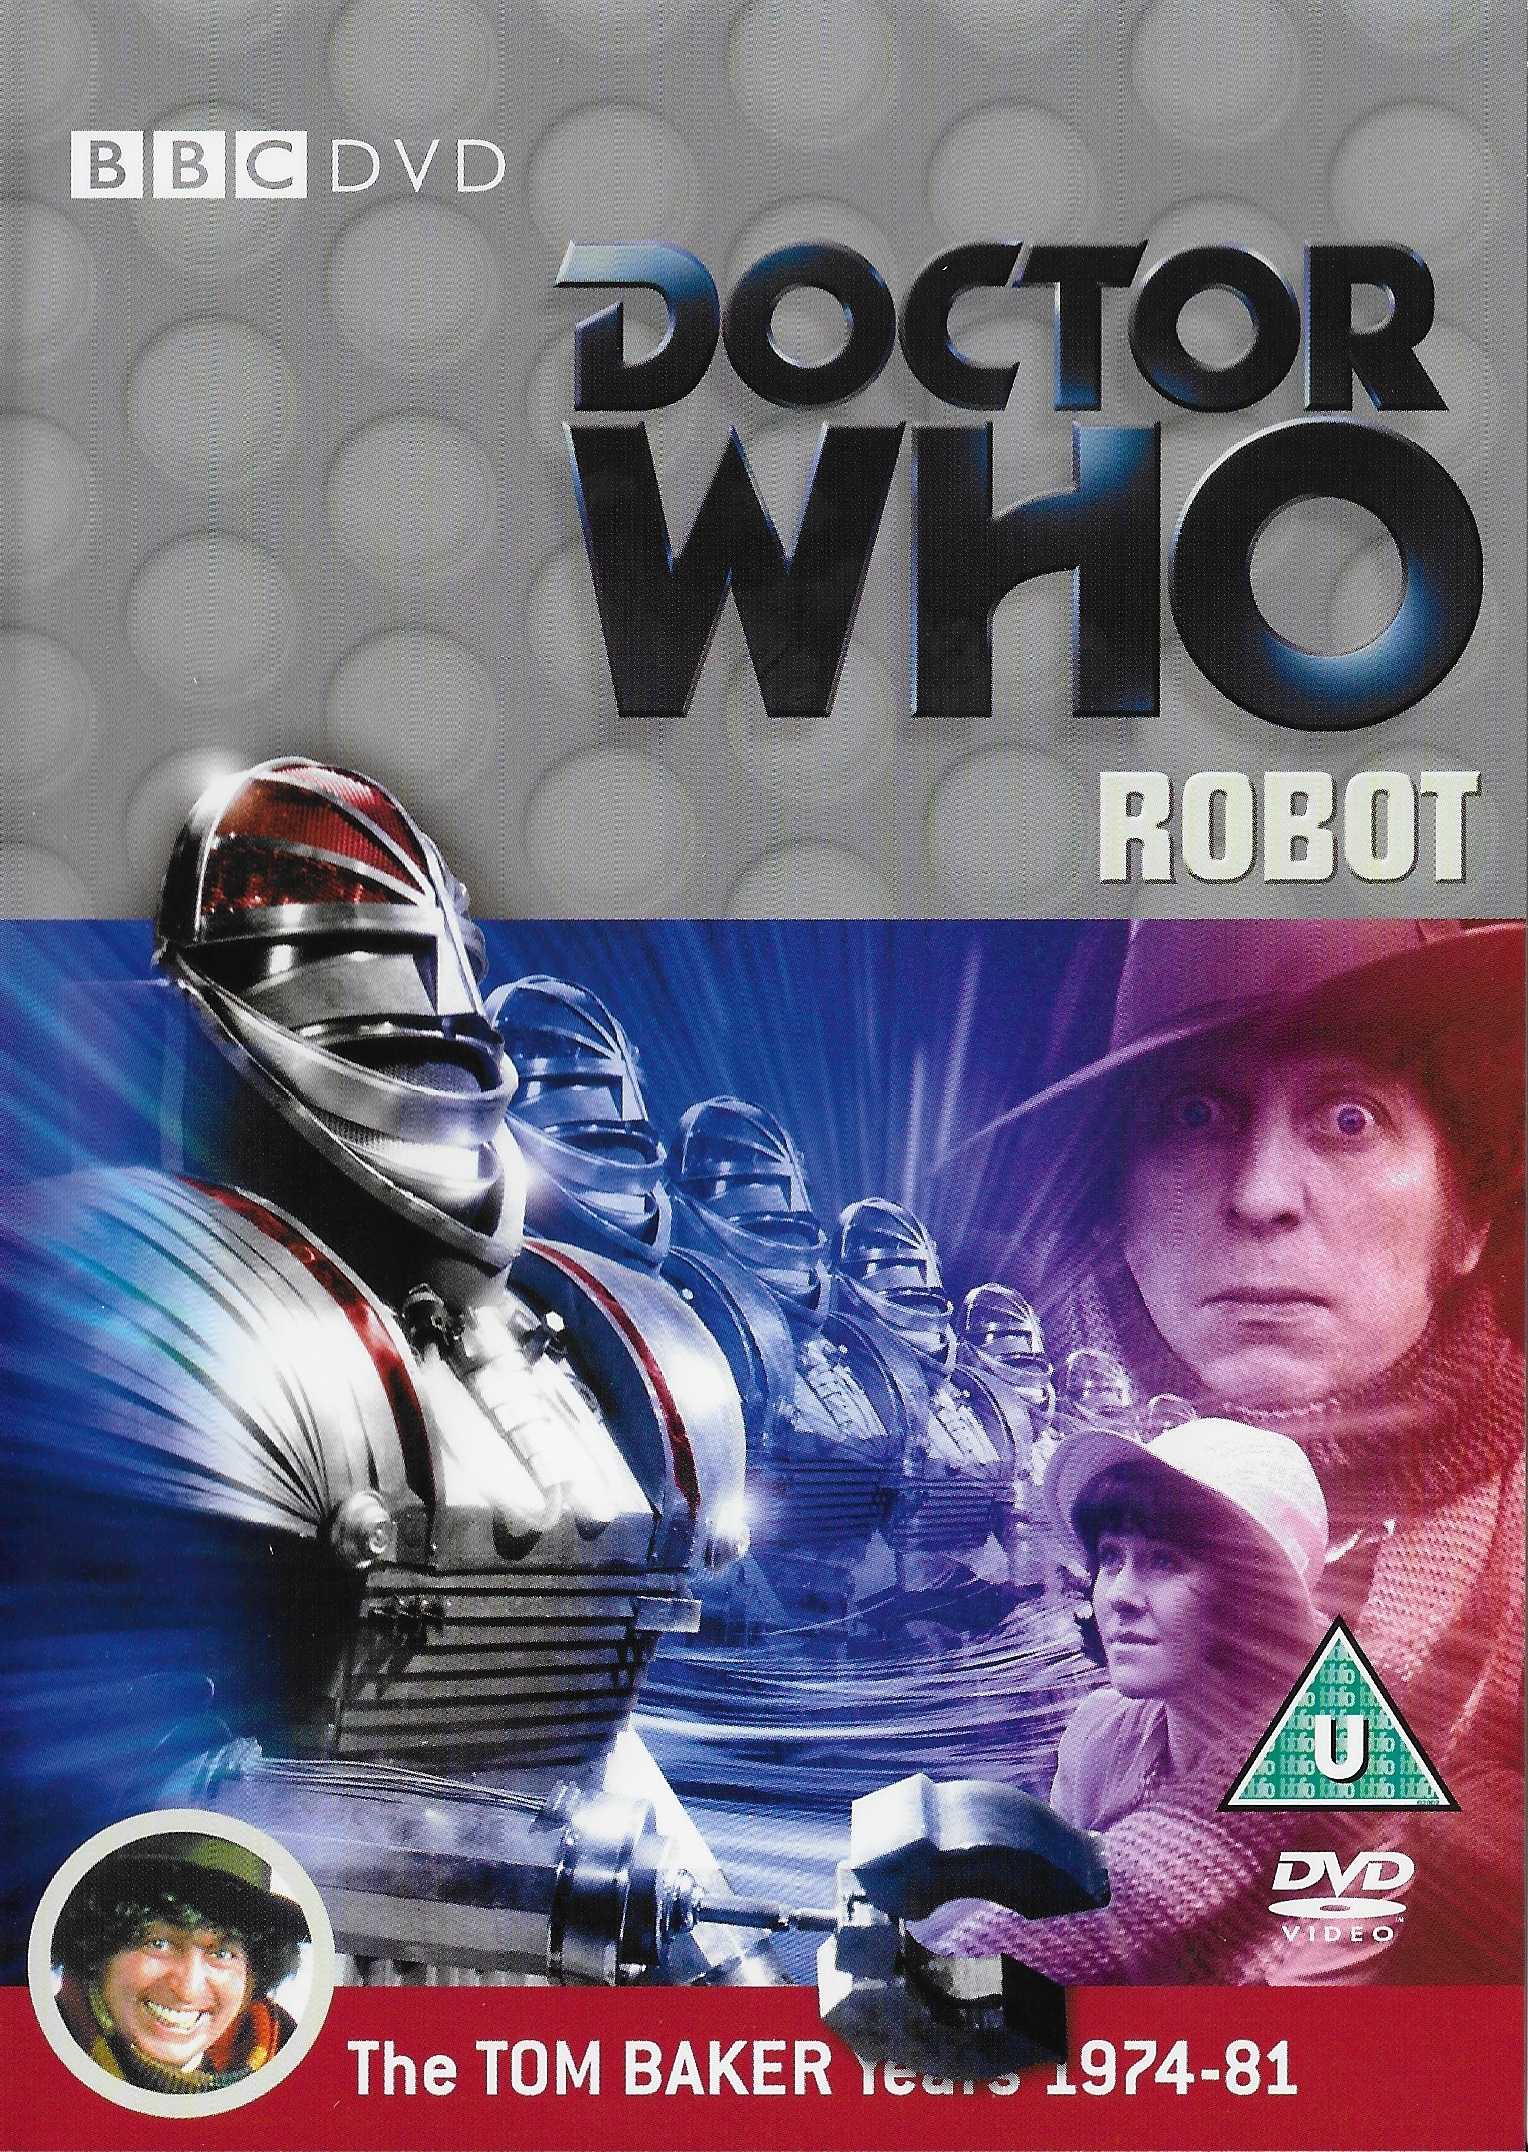 Picture of BBCDVD 2332 Doctor Who - Robot by artist Terrance Dicks from the BBC records and Tapes library